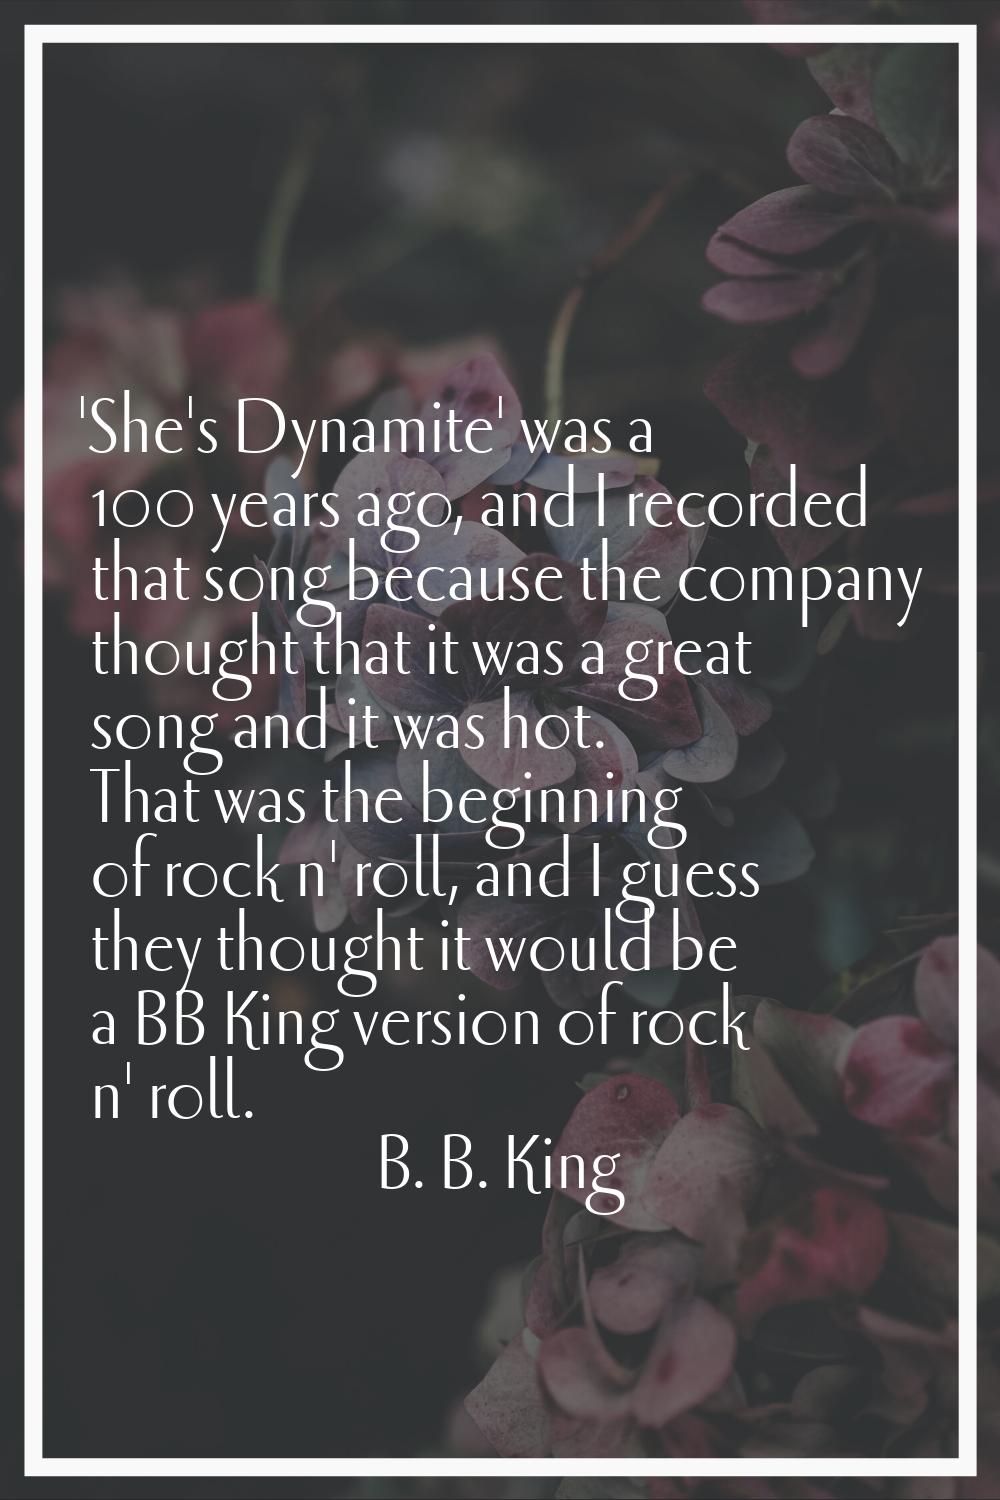 'She's Dynamite' was a 100 years ago, and I recorded that song because the company thought that it 